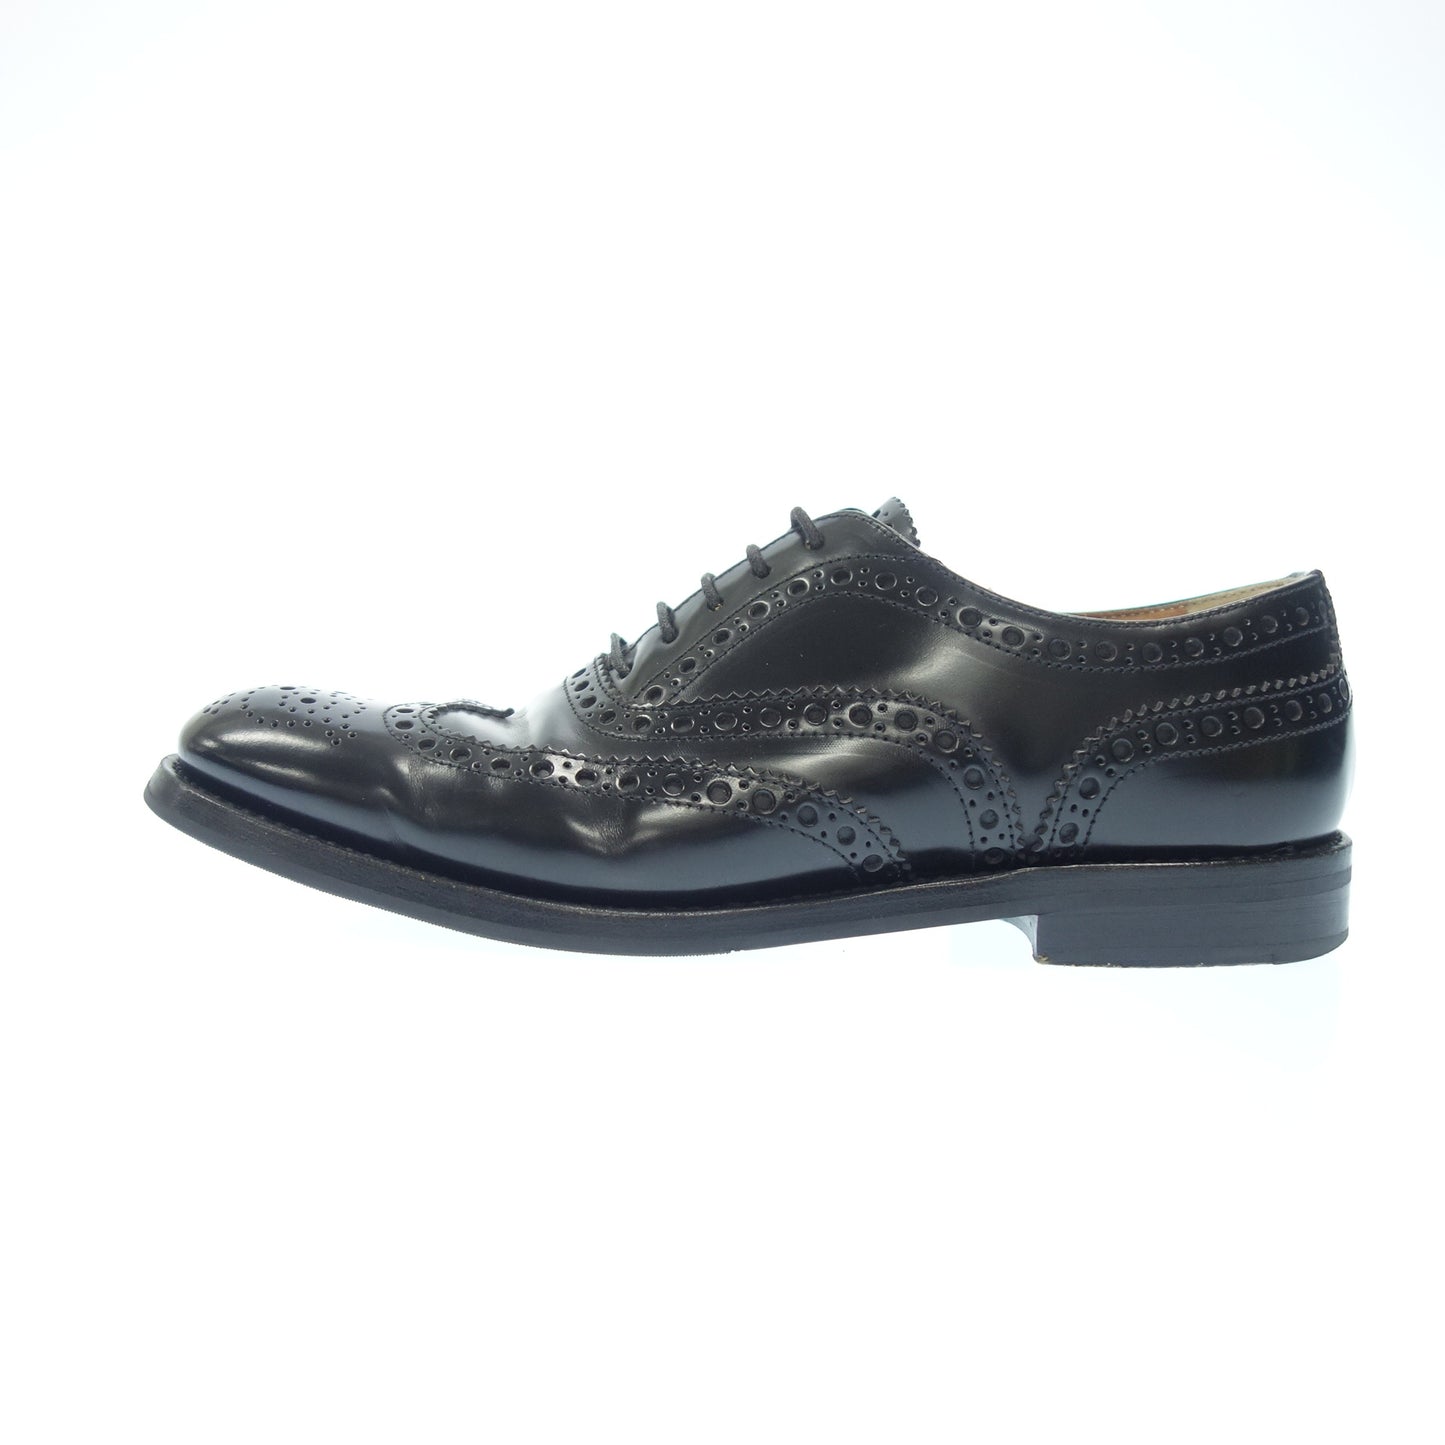 Good Condition◆Church Wingtip Leather Shoes BURWOOD Black Ladies 34 Church's [AFC51] 